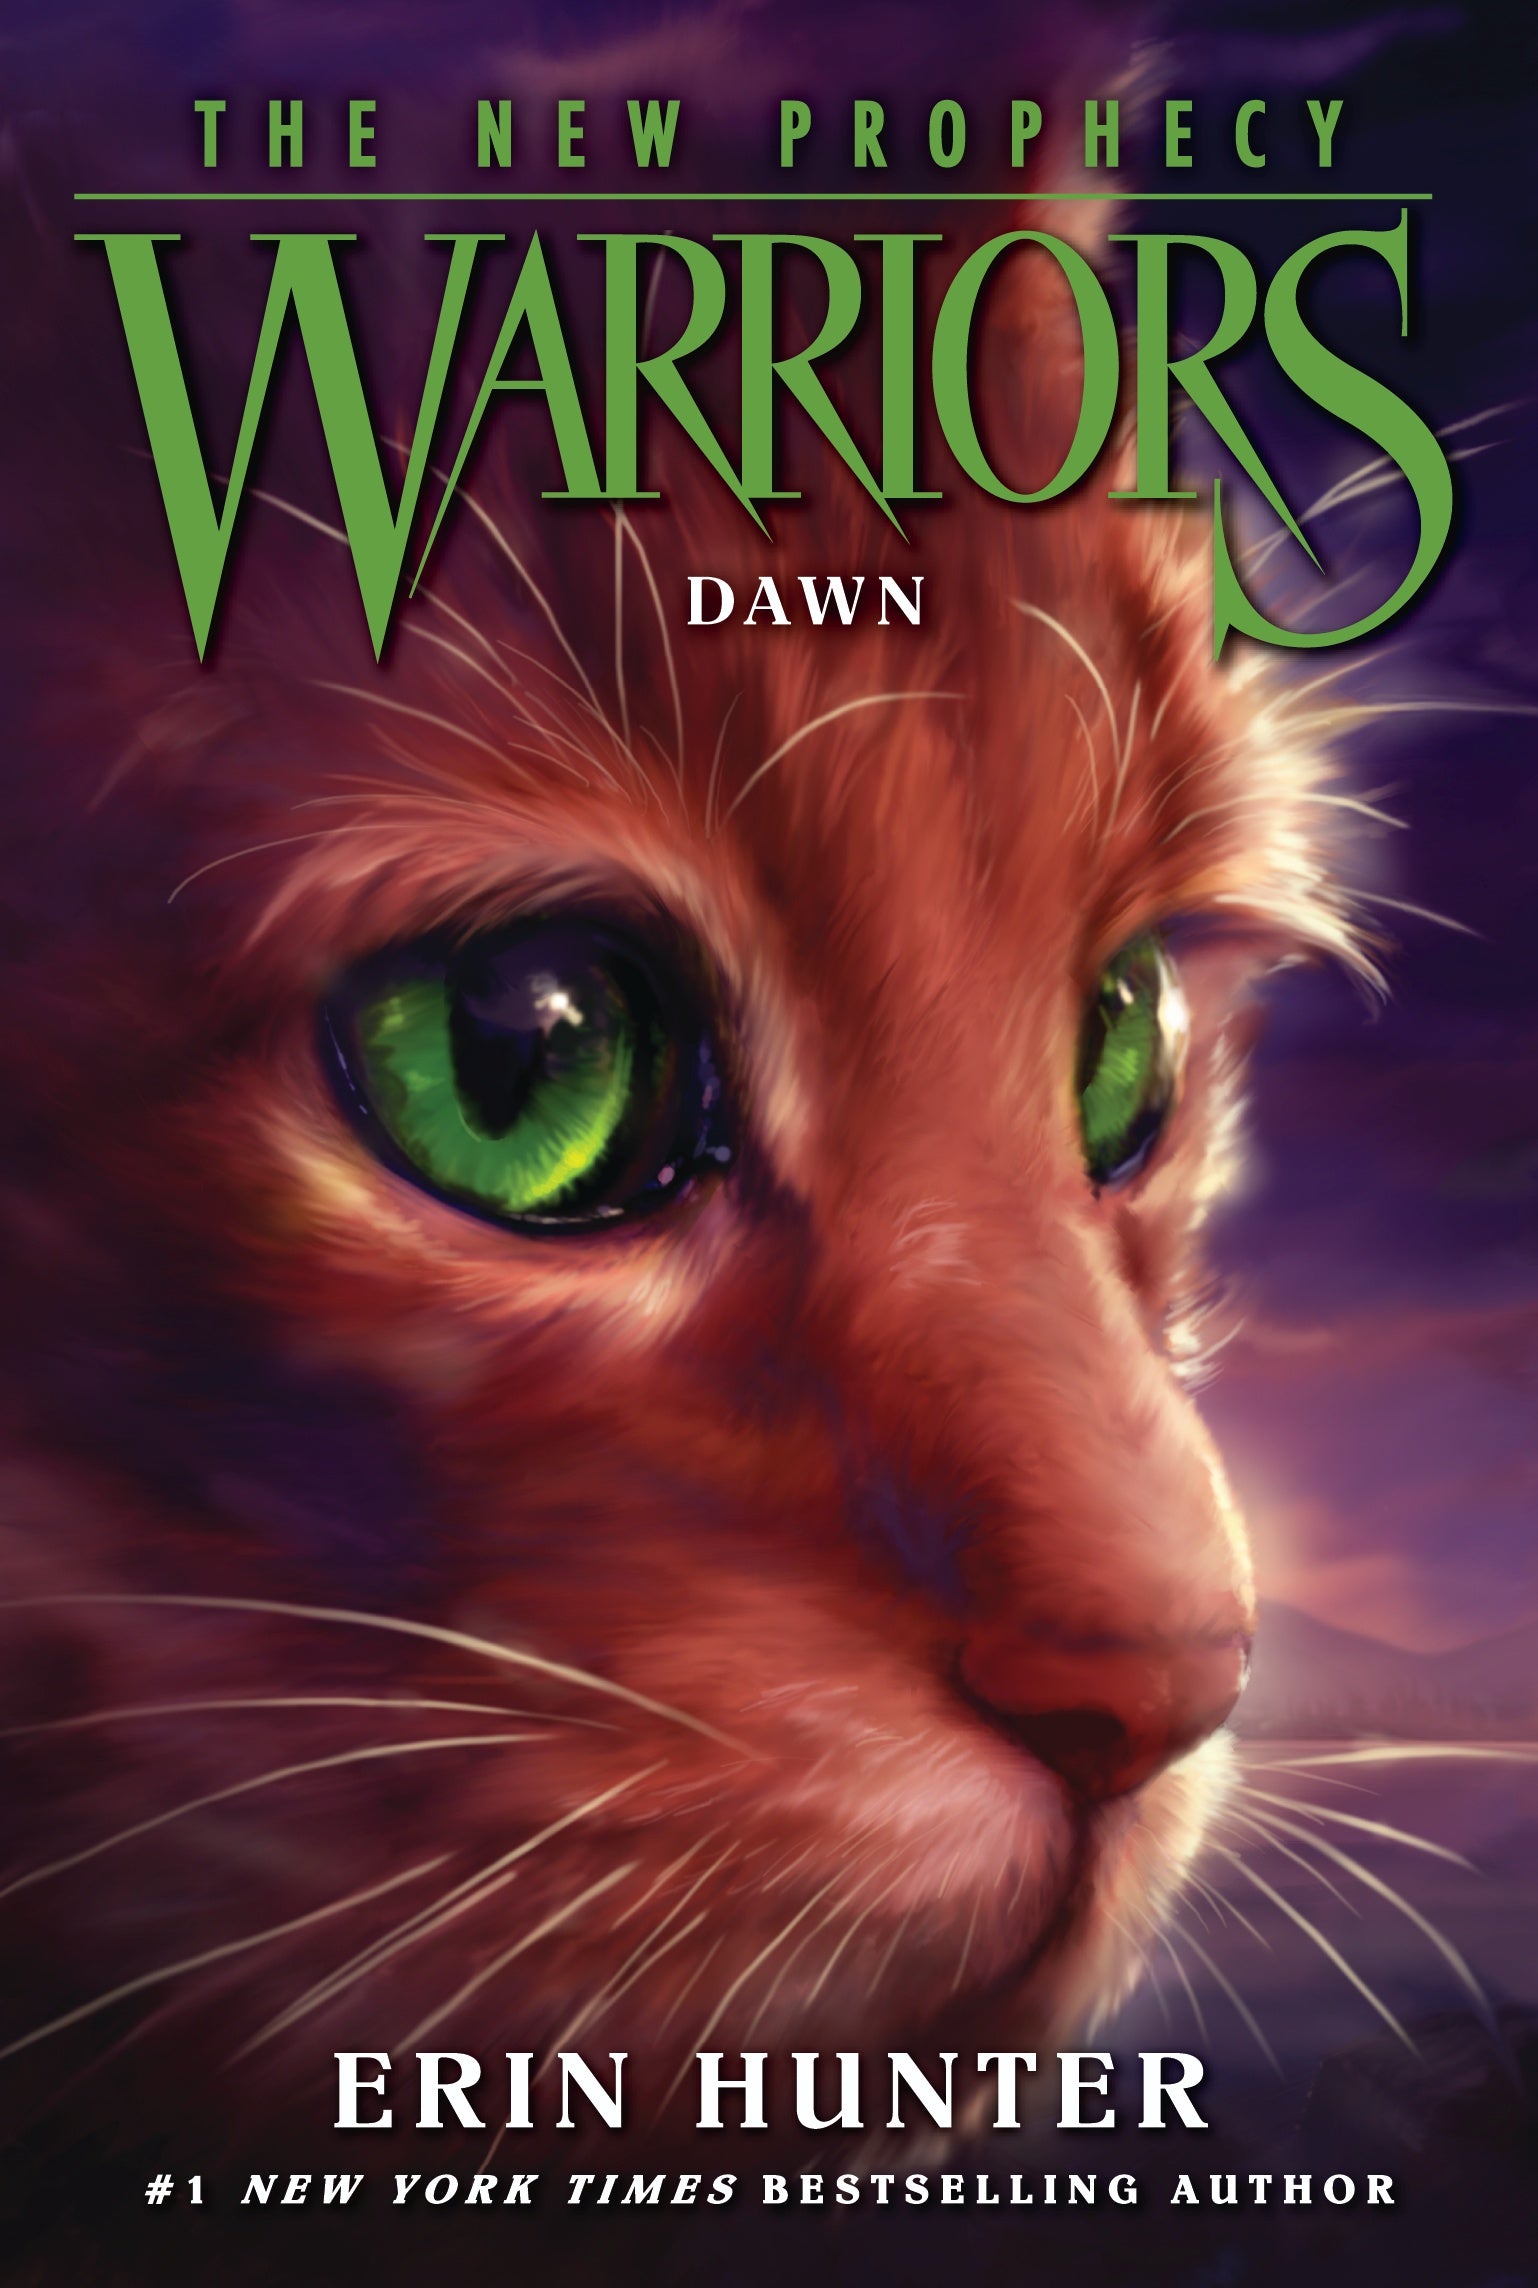 Warriors The New Prophecy Midnight Book